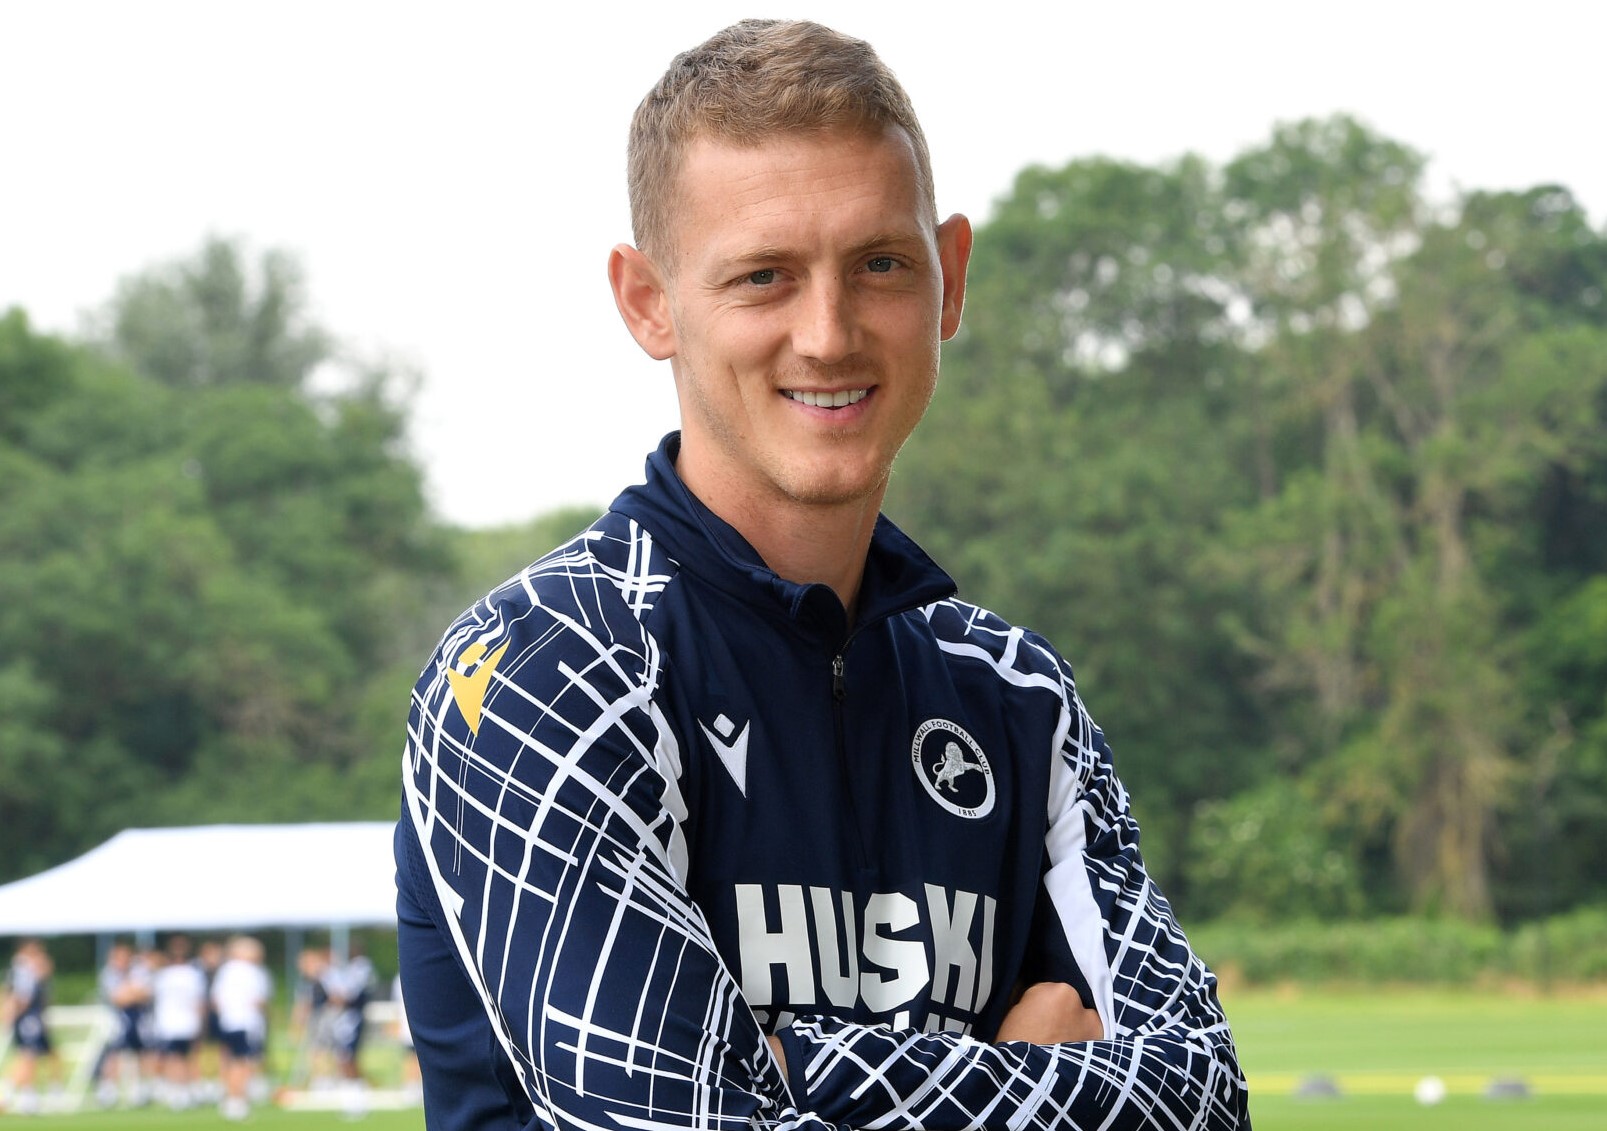 George Saville Age, Salary, Net worth, Current Teams, Career, Height, and much more